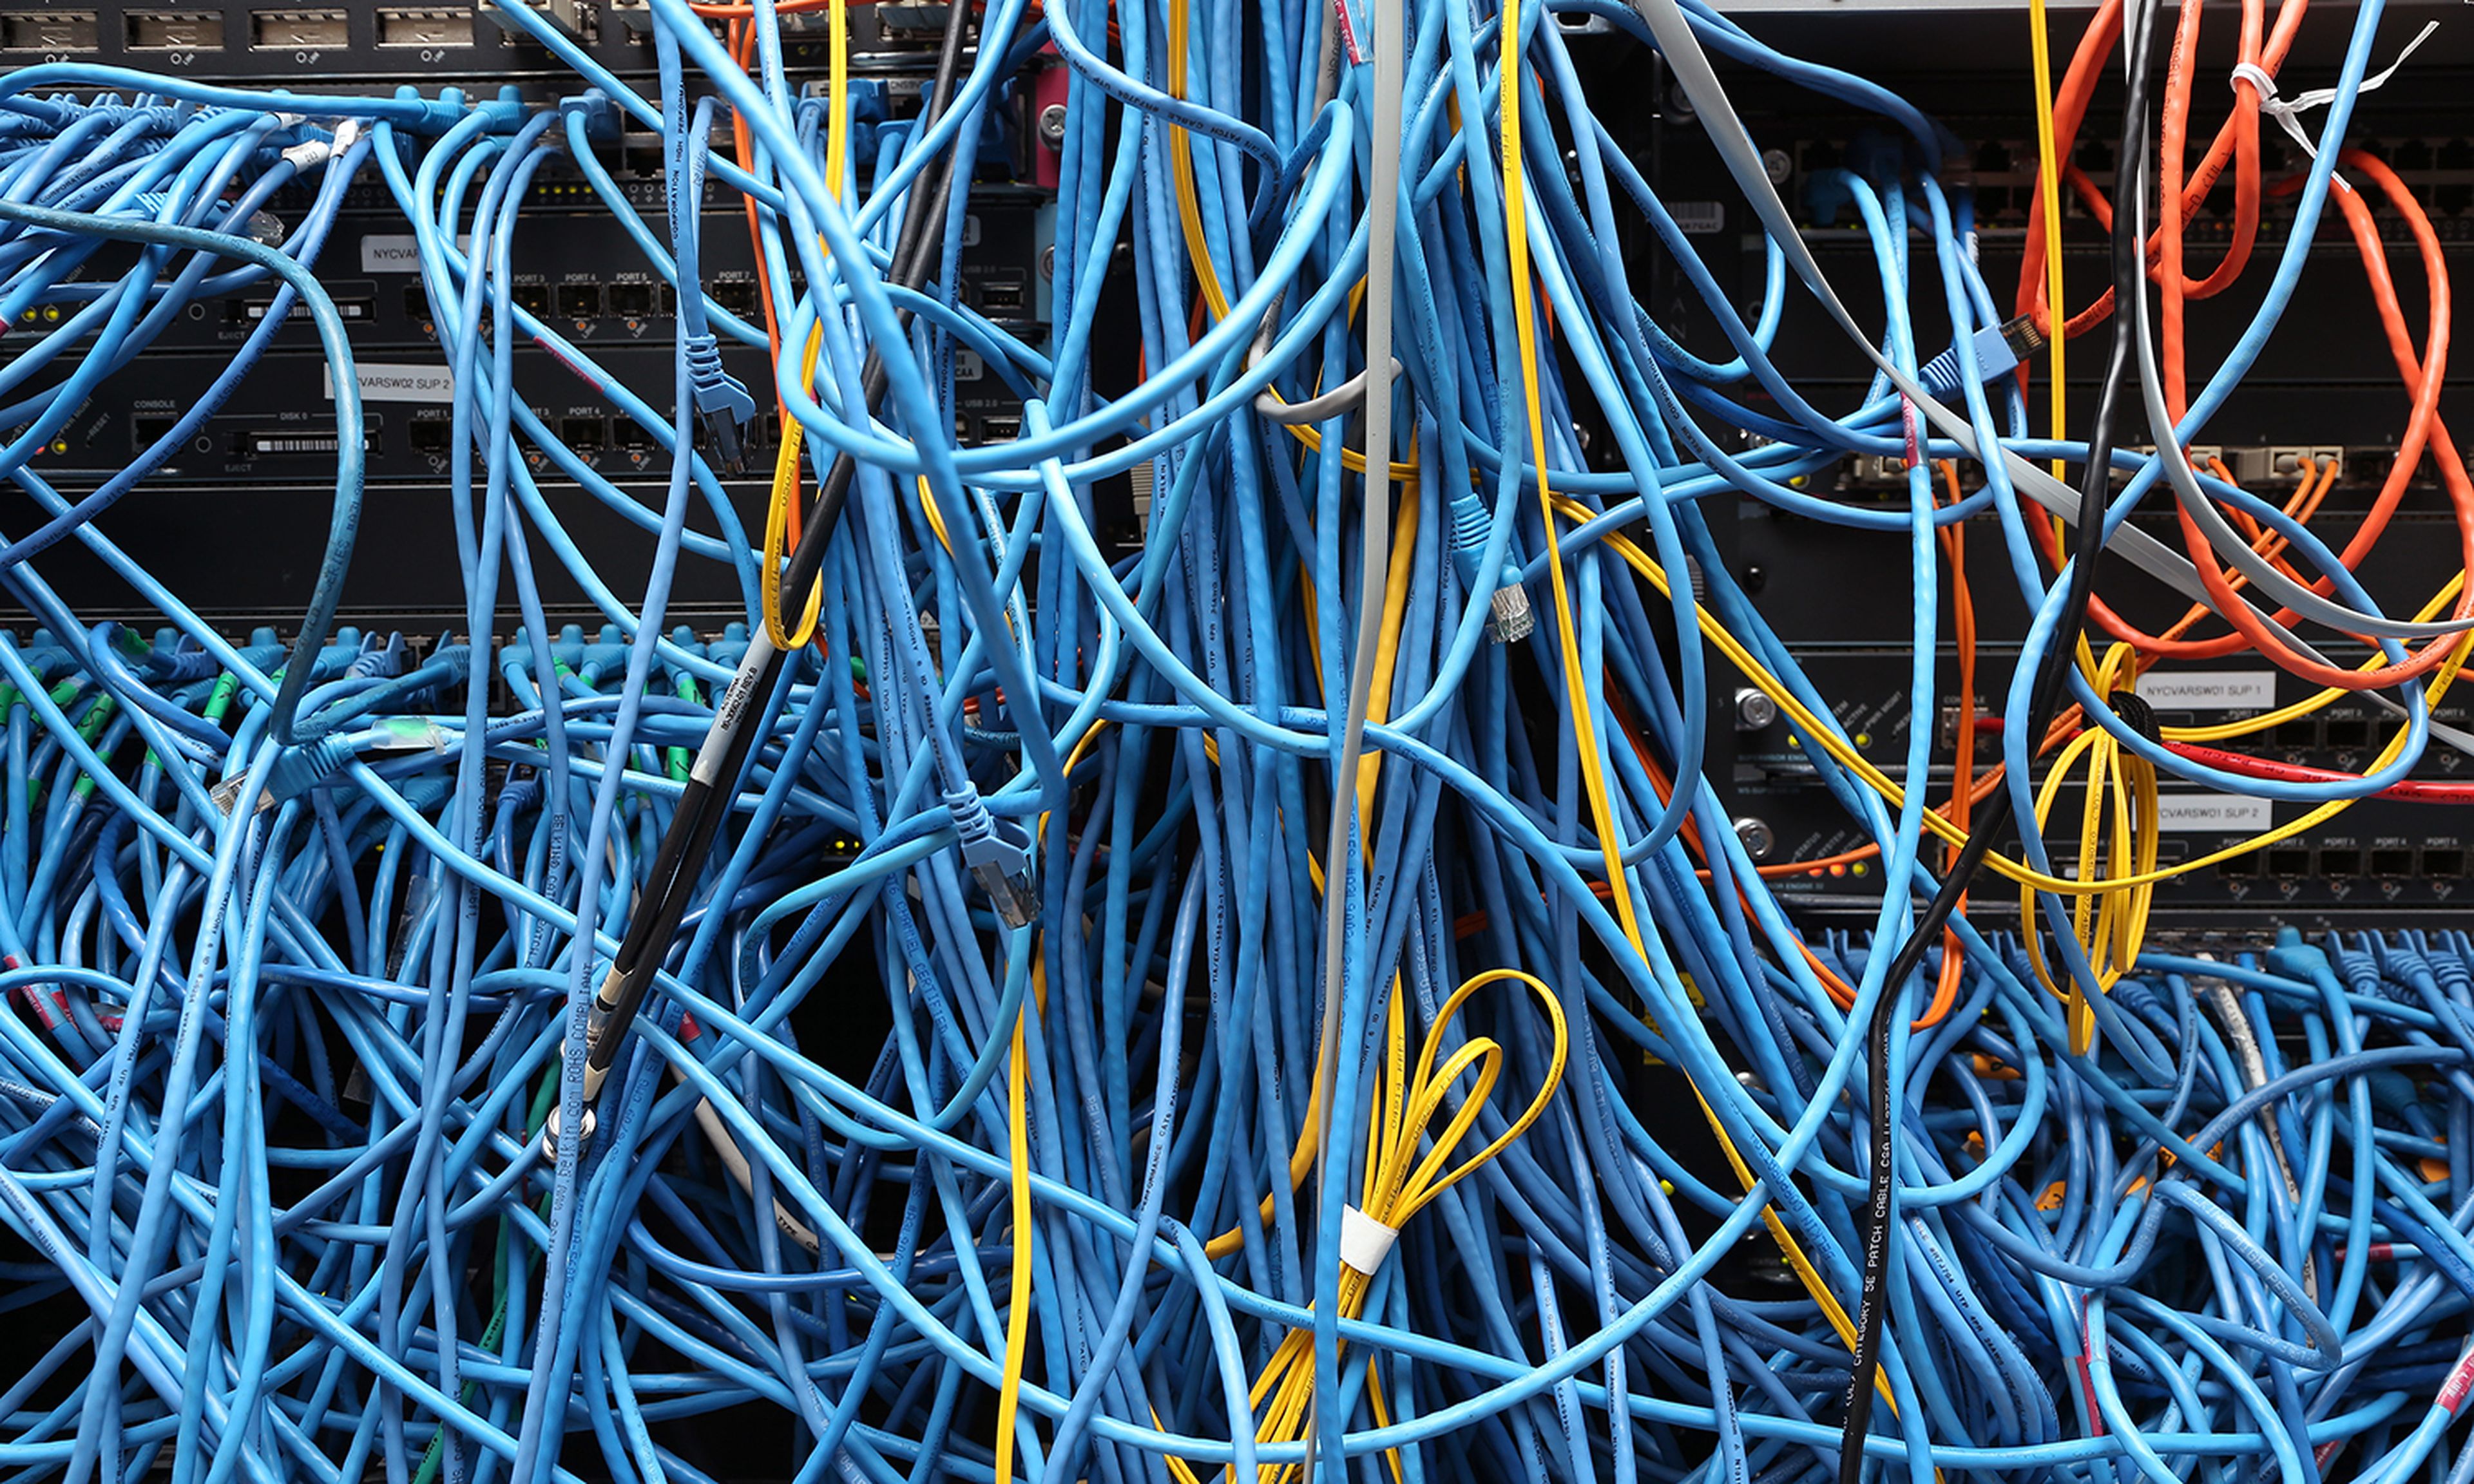 Network cables are plugged in a server room in New York City. (Photo by Michael Bocchieri/Getty Images)